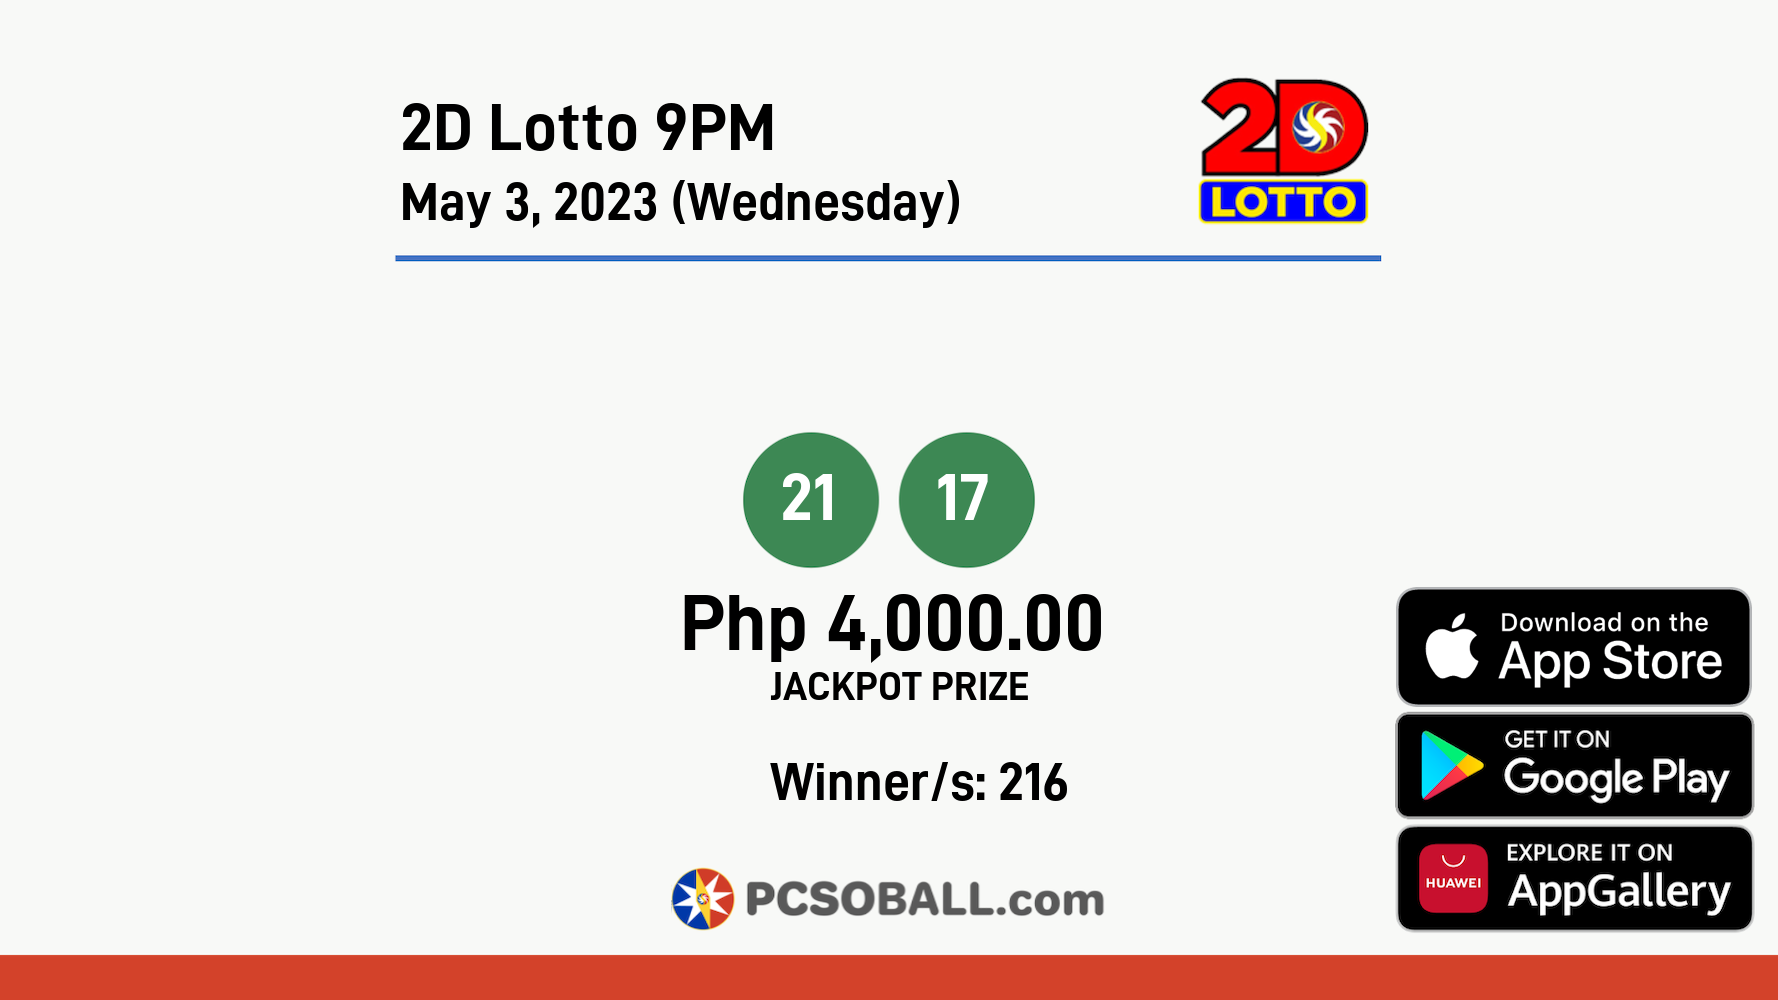 2D Lotto 9PM May 3, 2023 (Wednesday) Result